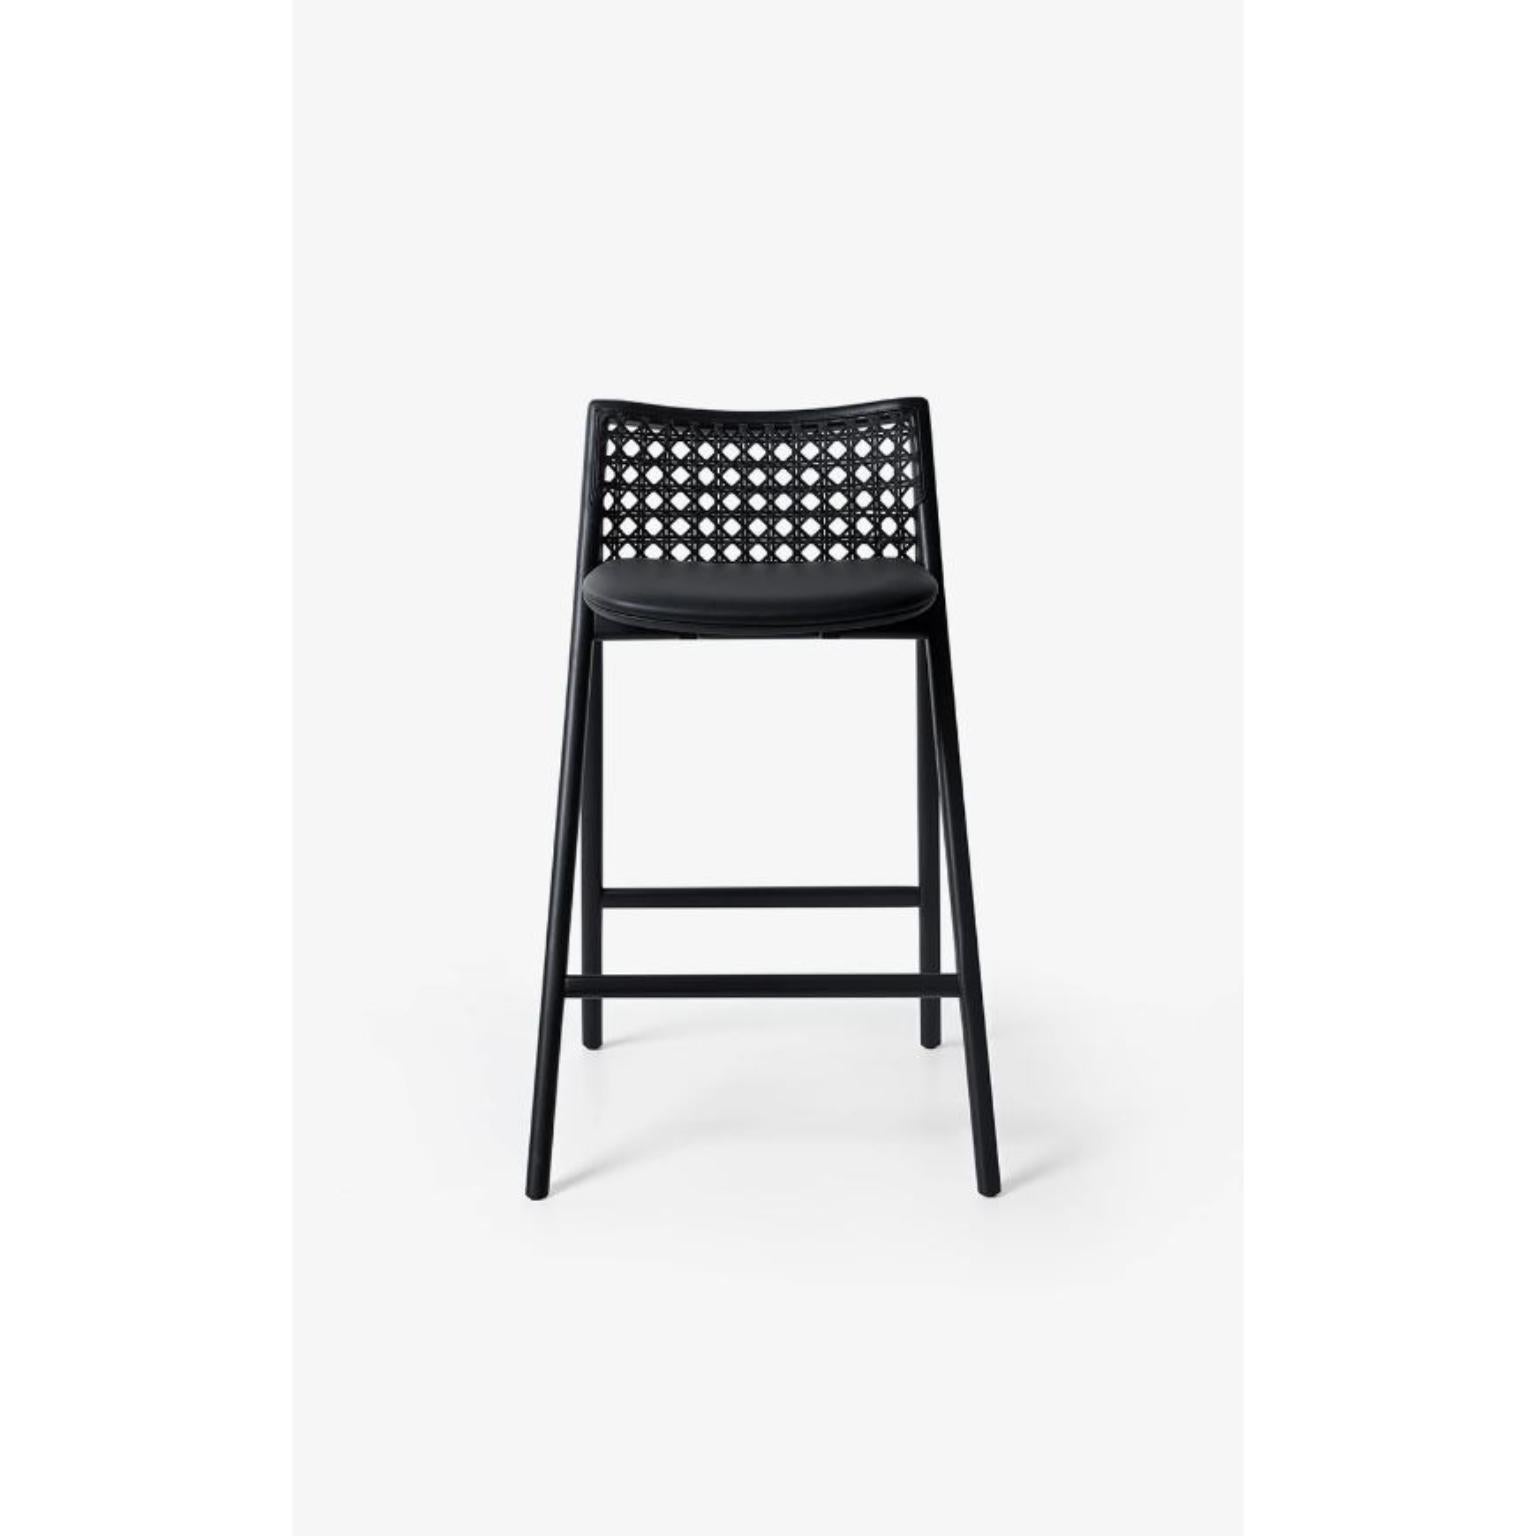 Black Tela Counter Stool by Wentz
Dimensions: D 52 x W 58 x H 84 cm
Materials: Tauari Wood, Cotton, Weave, Plywood, Upholstery.
Weight: 5,8kg / 12,7 lbs

The Tela armchair is a meeting between contemporary design and traditional Brazilian materials.